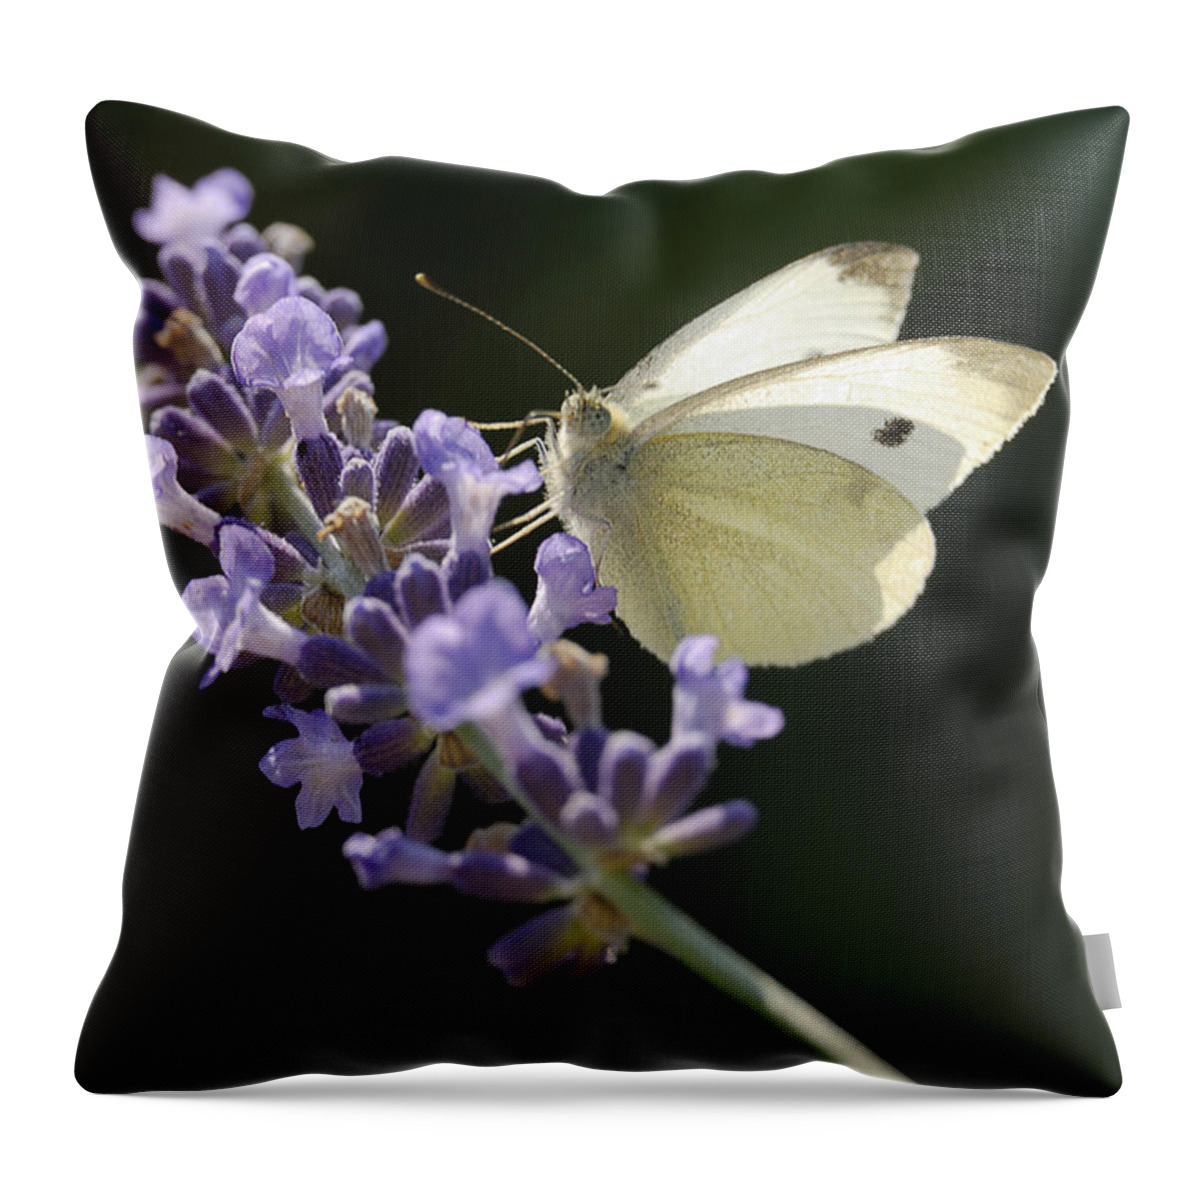 Insect Throw Pillow featuring the photograph Spot by Arthur Fix